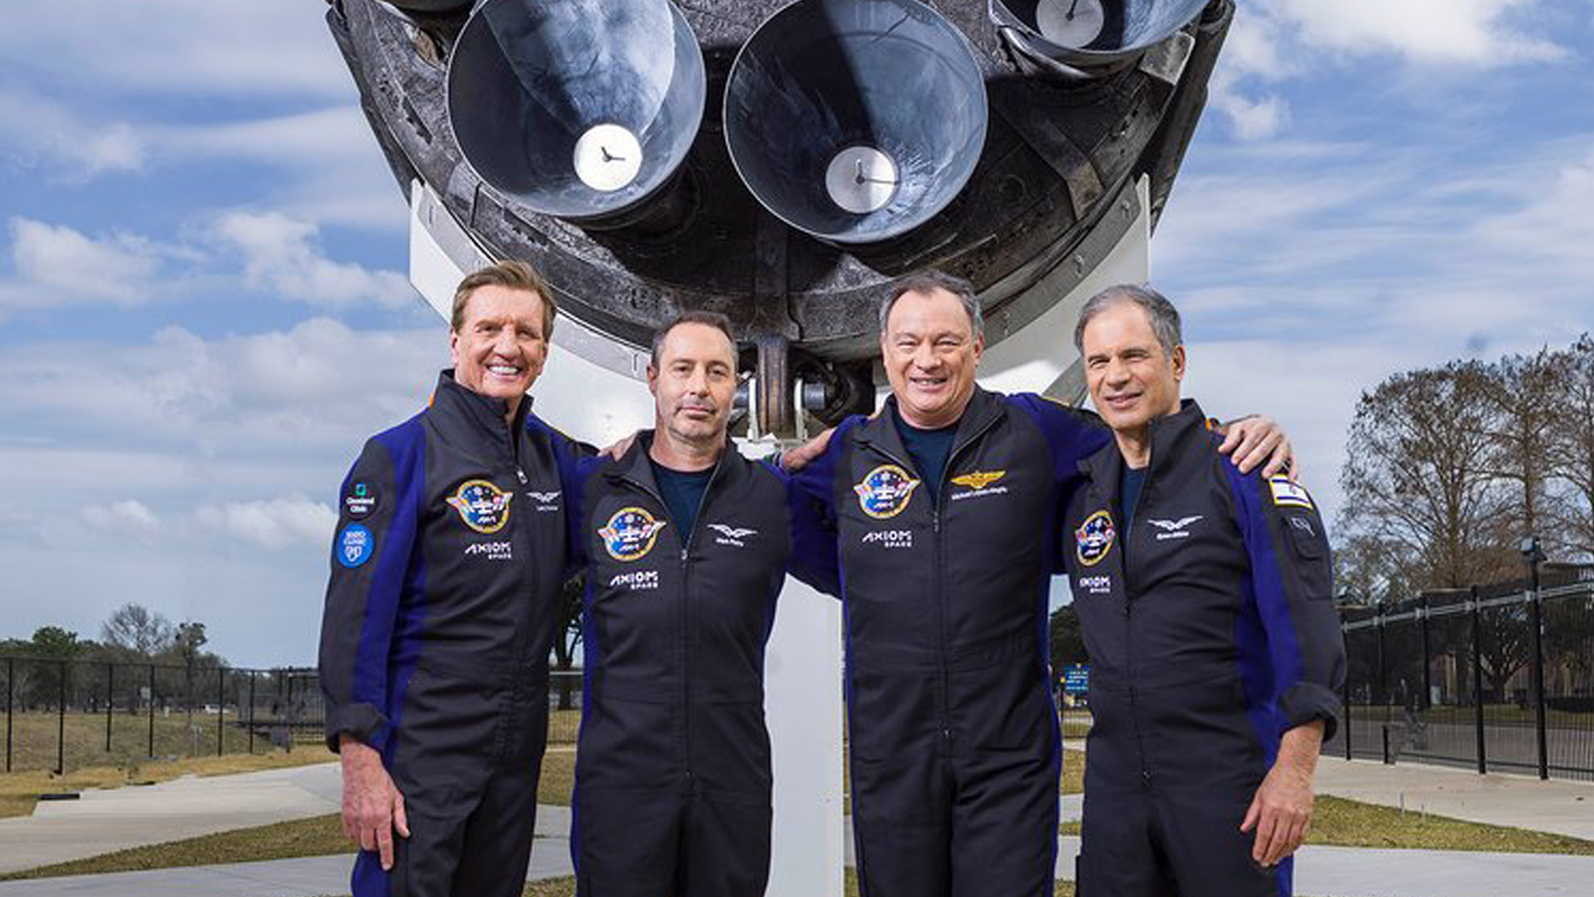 Axiom Space’s private Ax-1 pilots will fly a SpaceX spacecraft to the International Space Station in April 2022. They (from left): pilot Larry Connor;  Mark Pathy, a missionary lawyer;  López-Alegría, moon;  and Eytan Stibbe, a missionary lawyer.